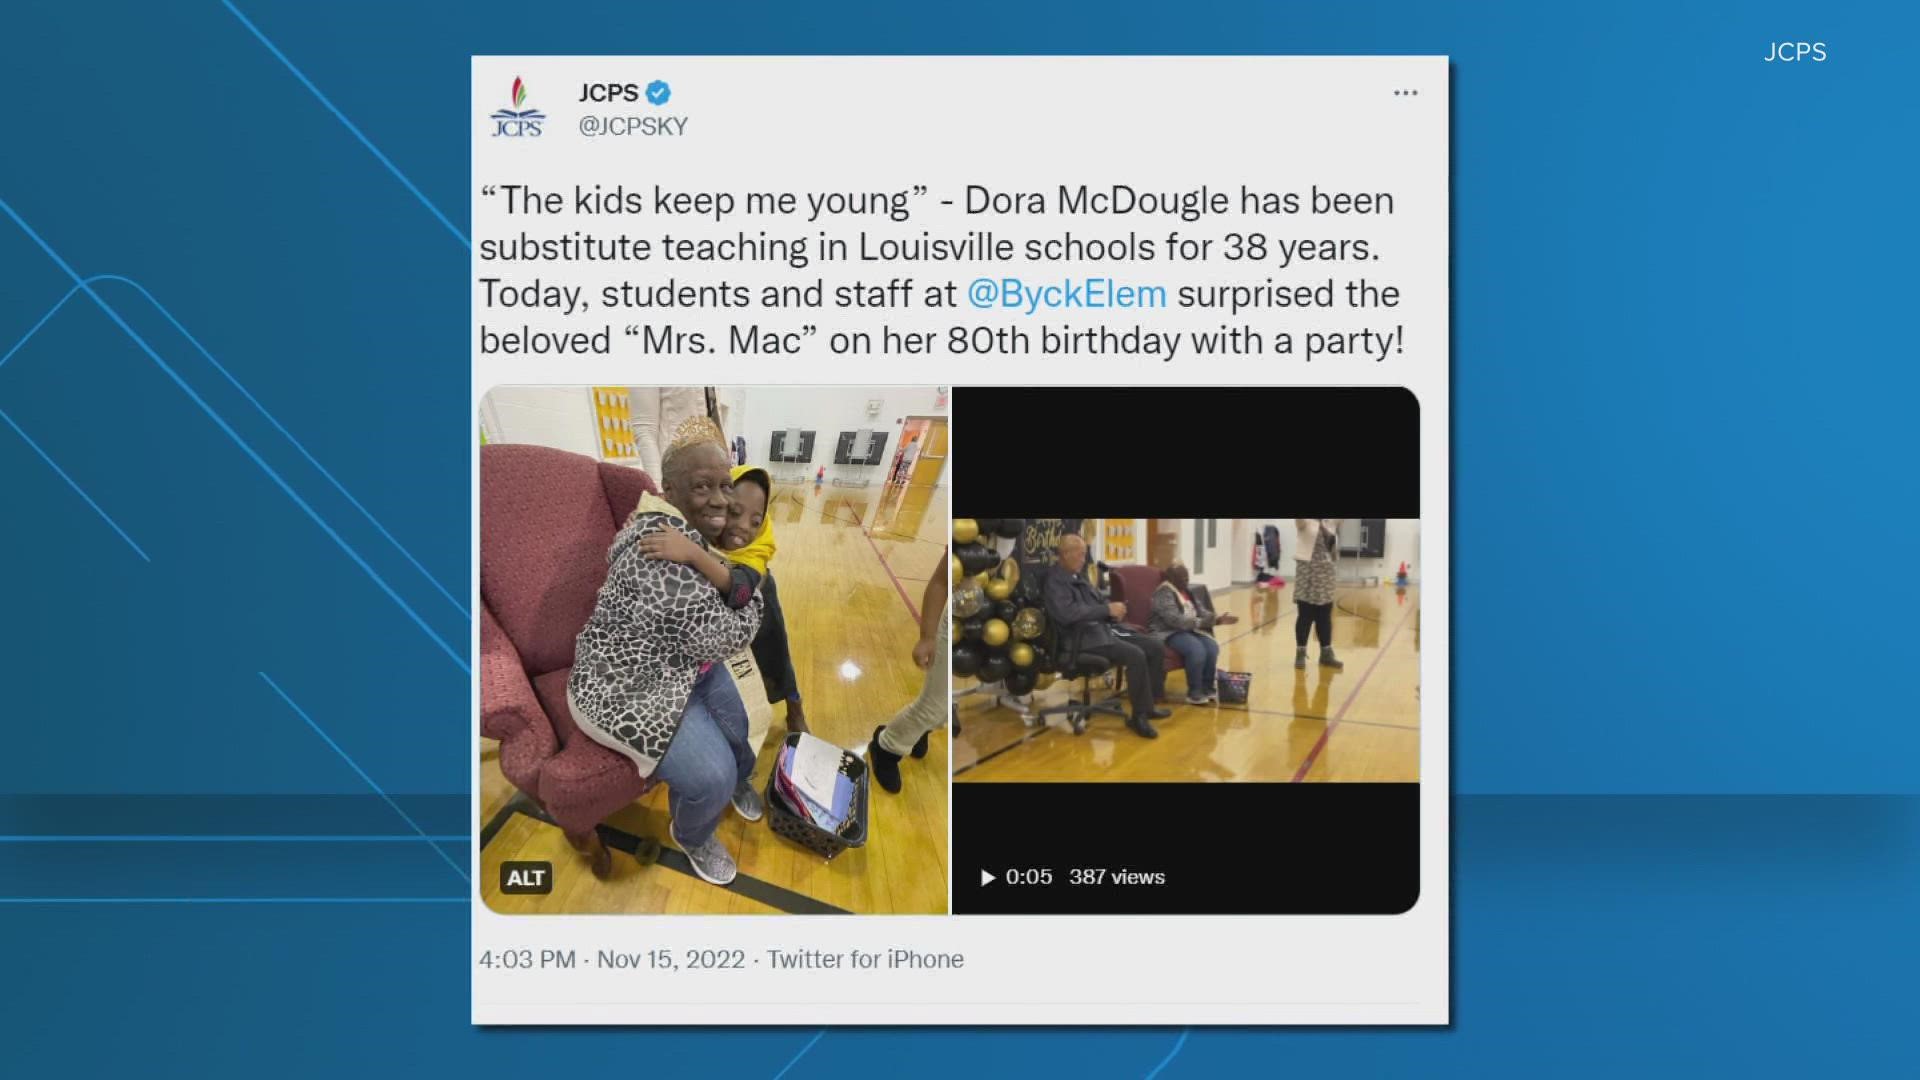 Dora McDougle, or "Mrs. Mac," turned 80 years old and has subbed in west Louisville schools for the last 38 years.